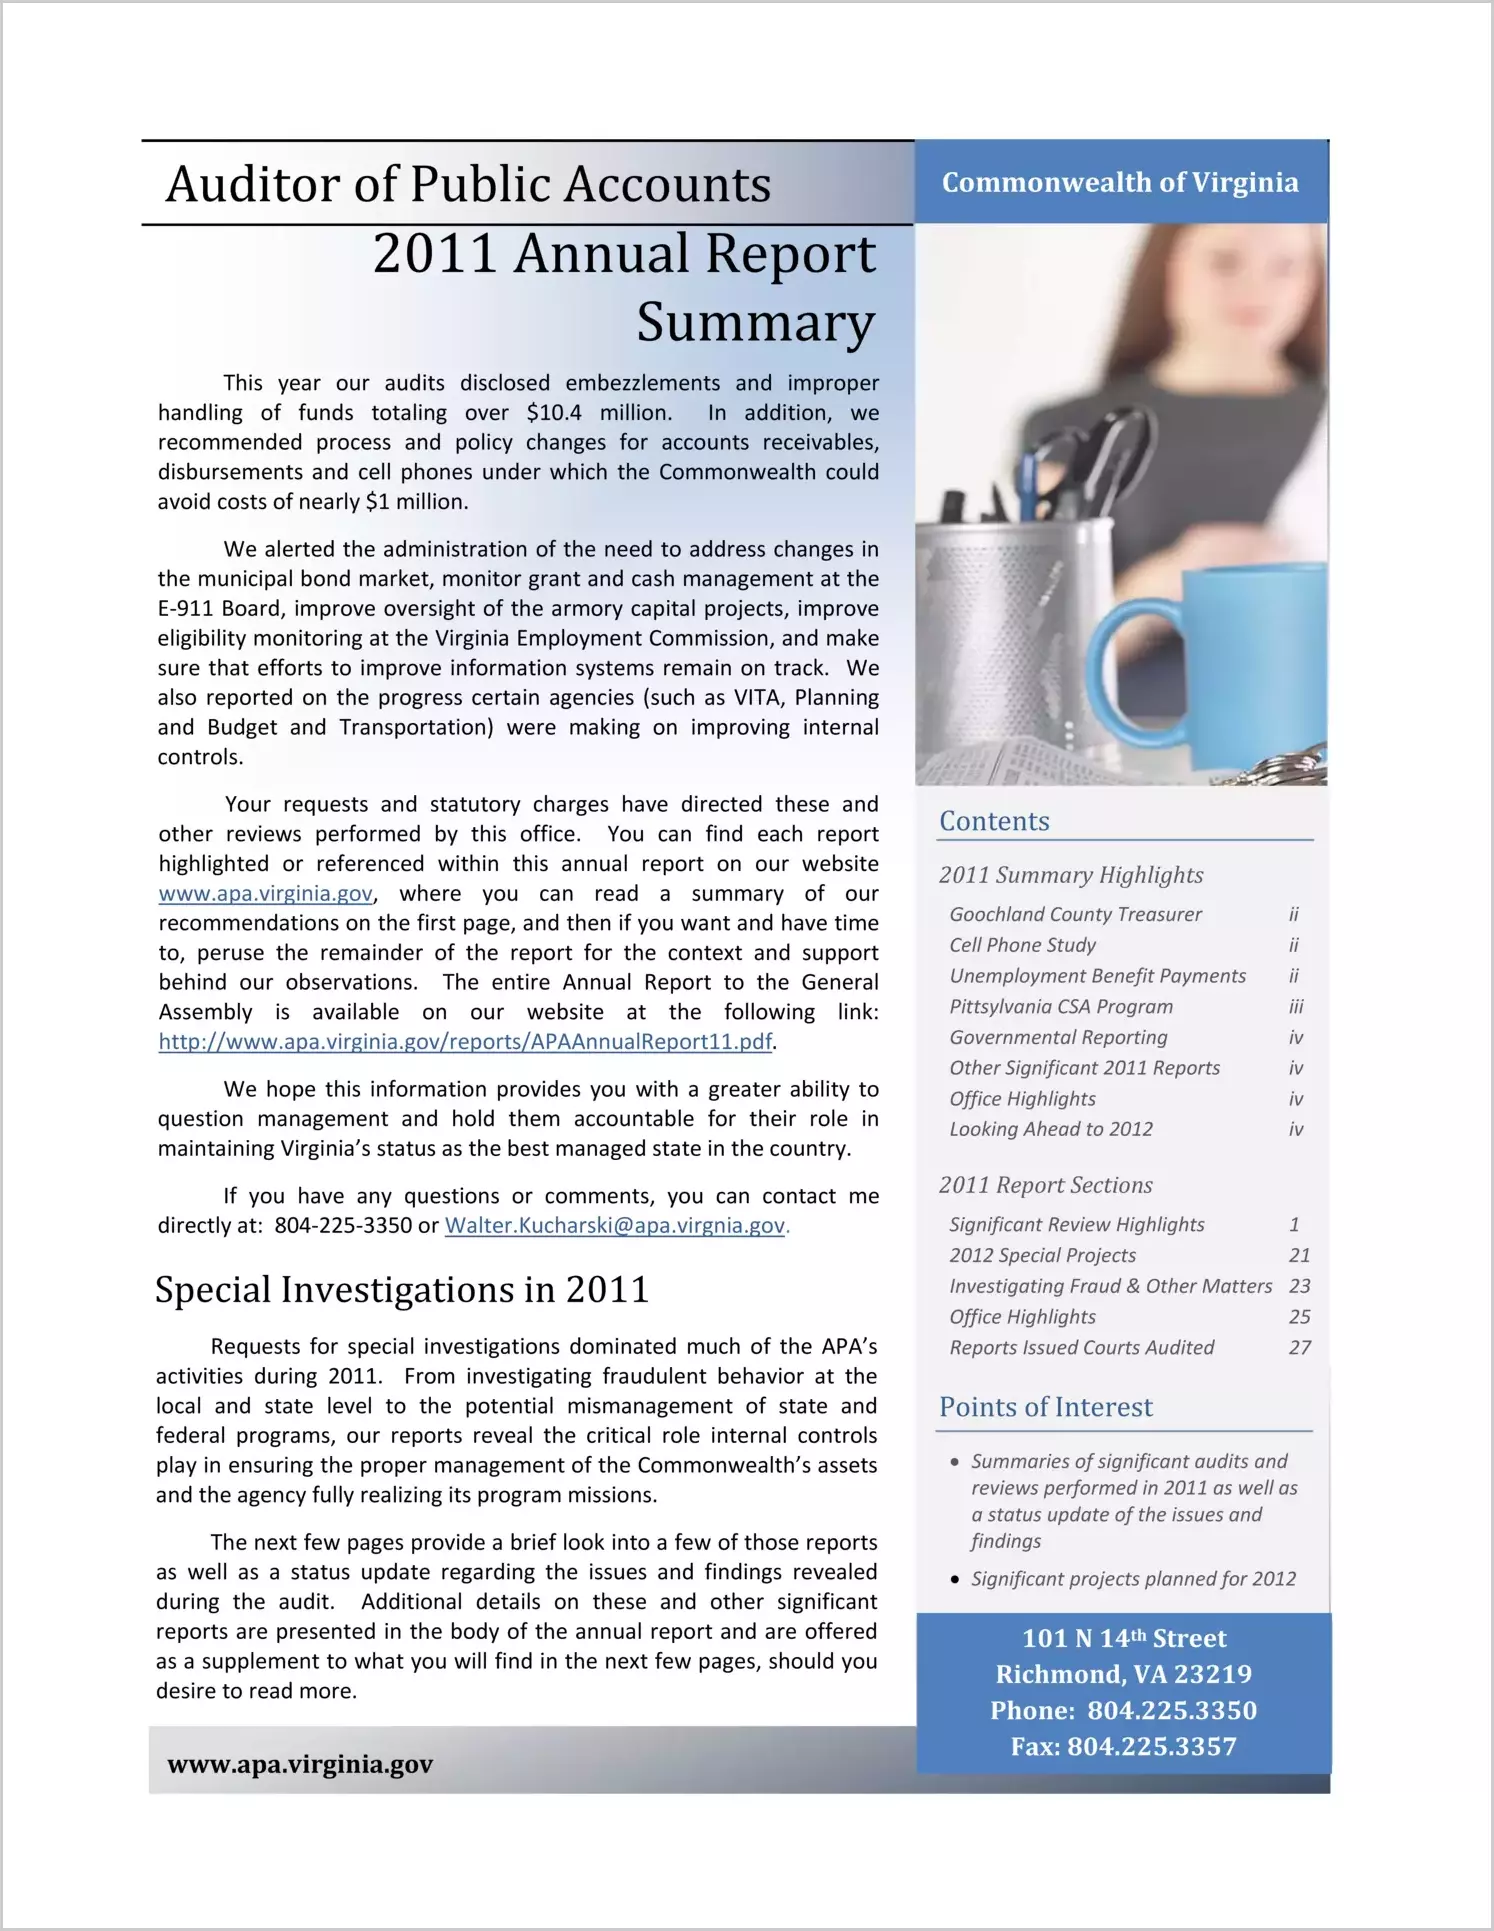 Auditor of Public Accounts Annual Report to the General Assembly for 2011